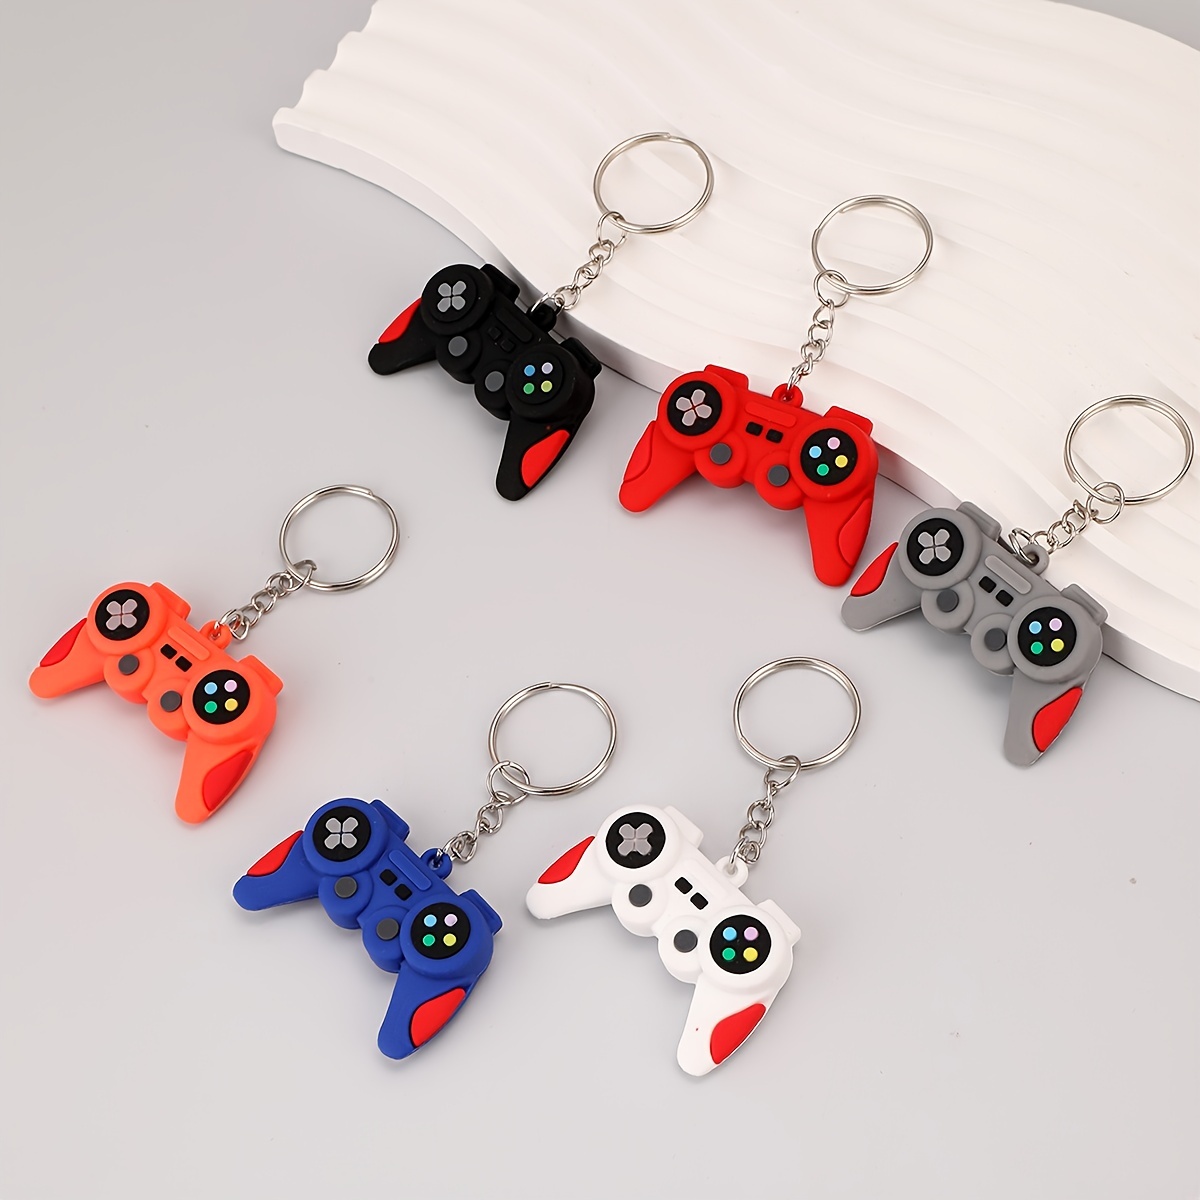 6pcs Video Game Controller Keychains | Party Favors & Birthday Gifts